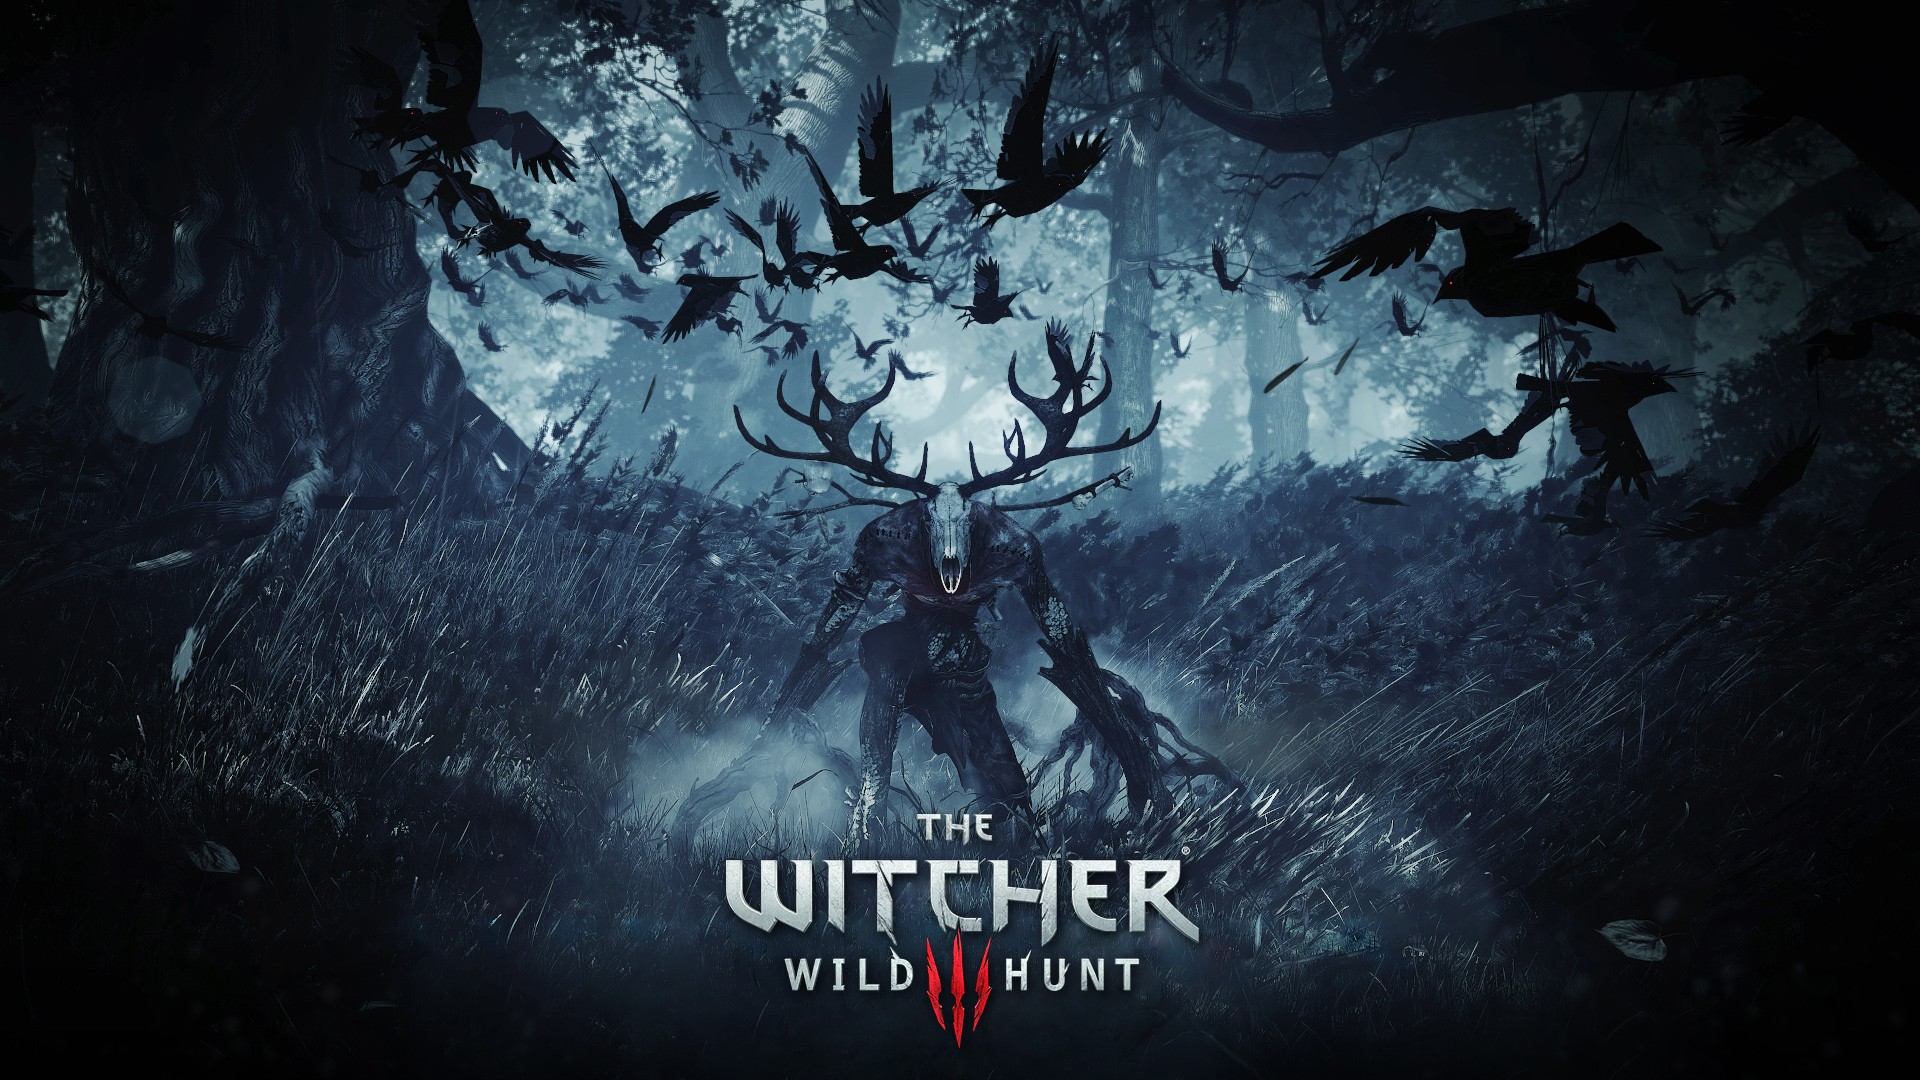 General 1920x1080 The Witcher 3: Wild Hunt video games PC gaming CD Projekt RED RPG video game art fantasy art antlers creature birds trees